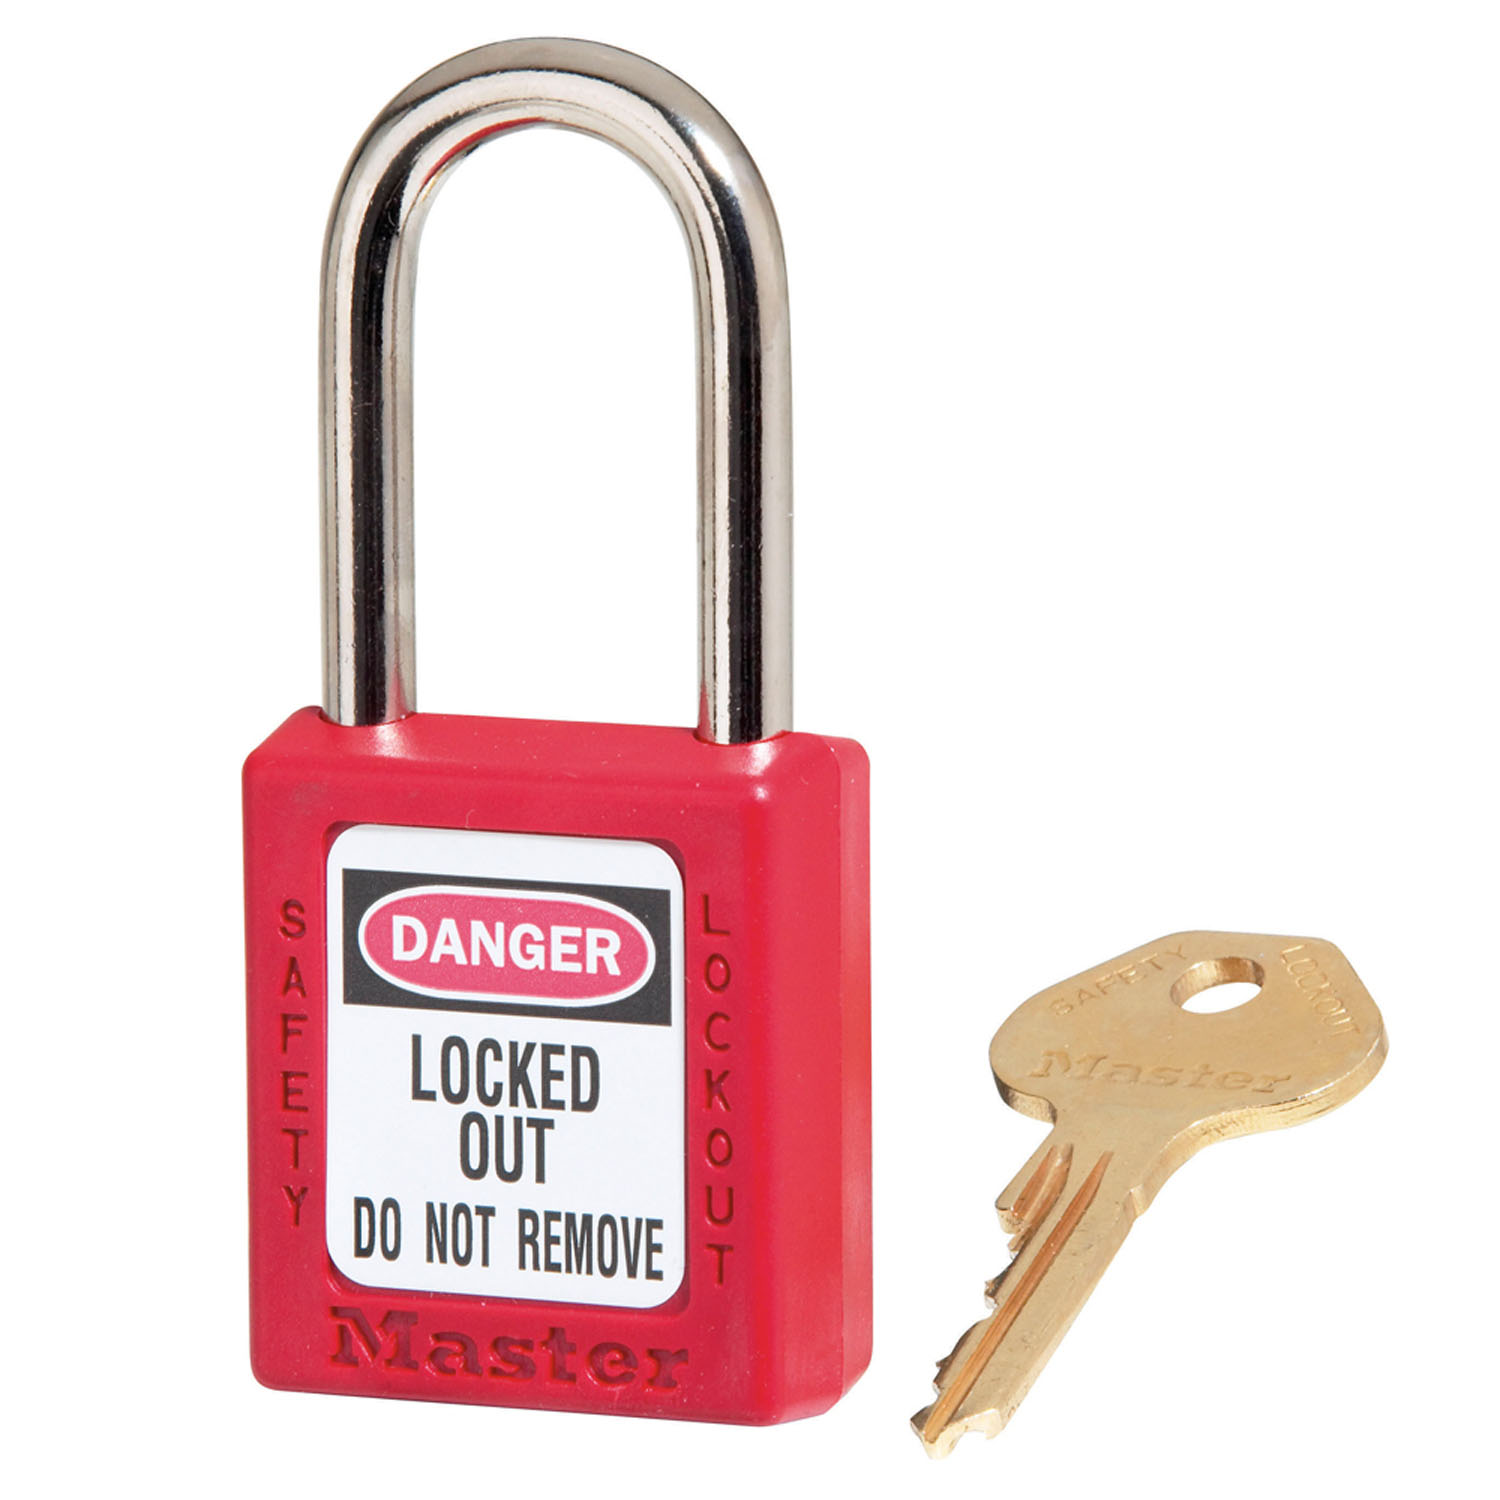 1-1/2 IN. WIDE ZENEX THERMOPLASTIC SAFETY LOCKOUT PADLOCK 1-1/2 IN. SHACKLE